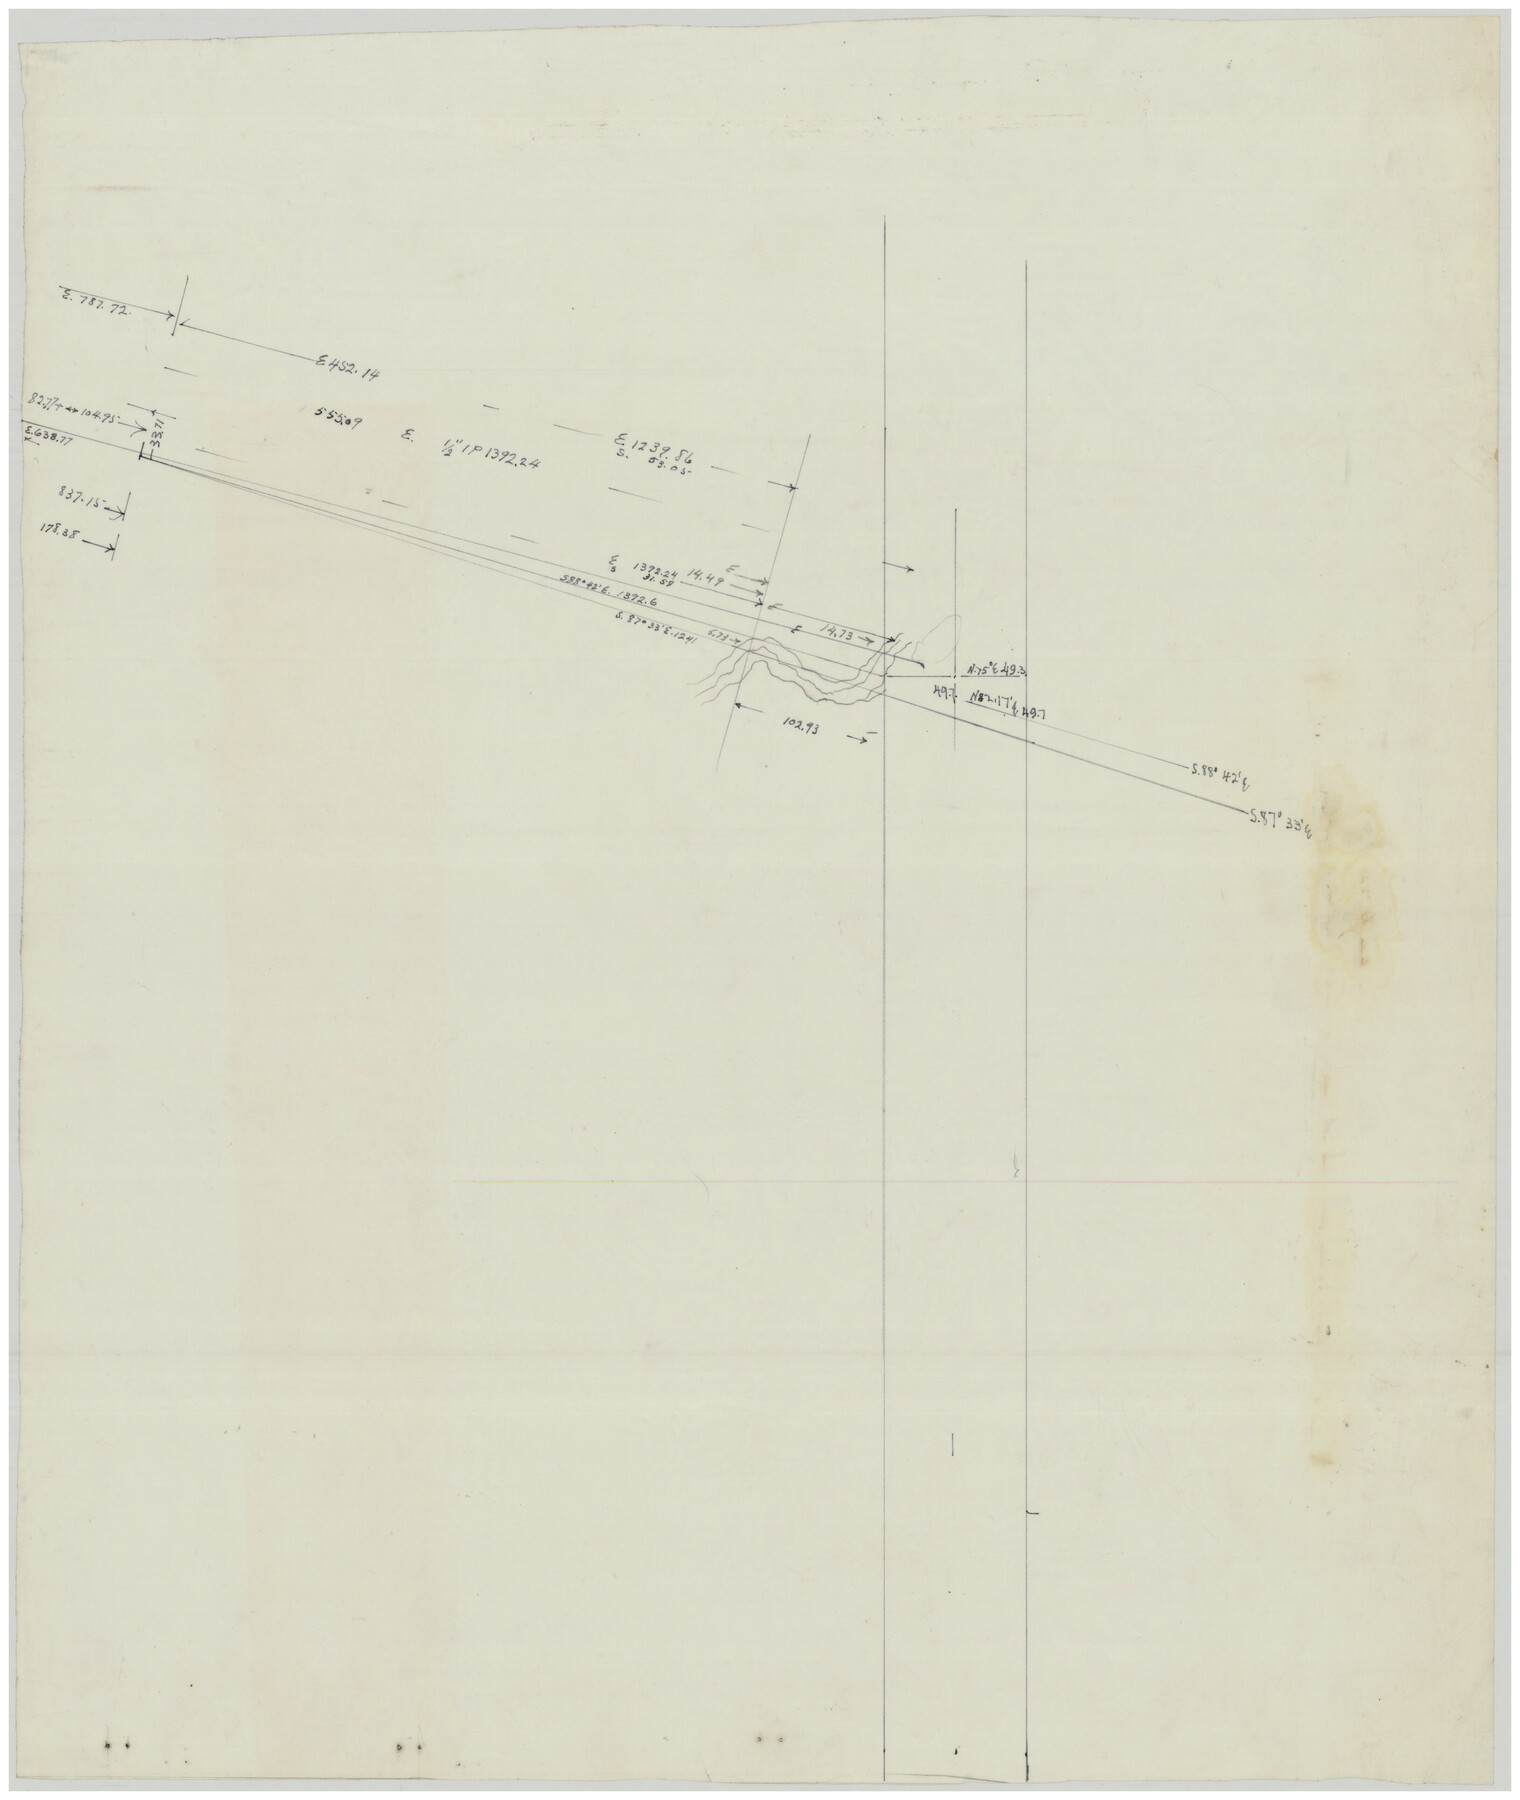 91269, [Worksheets related to the Wilson Strickland survey and vicinity], Twichell Survey Records